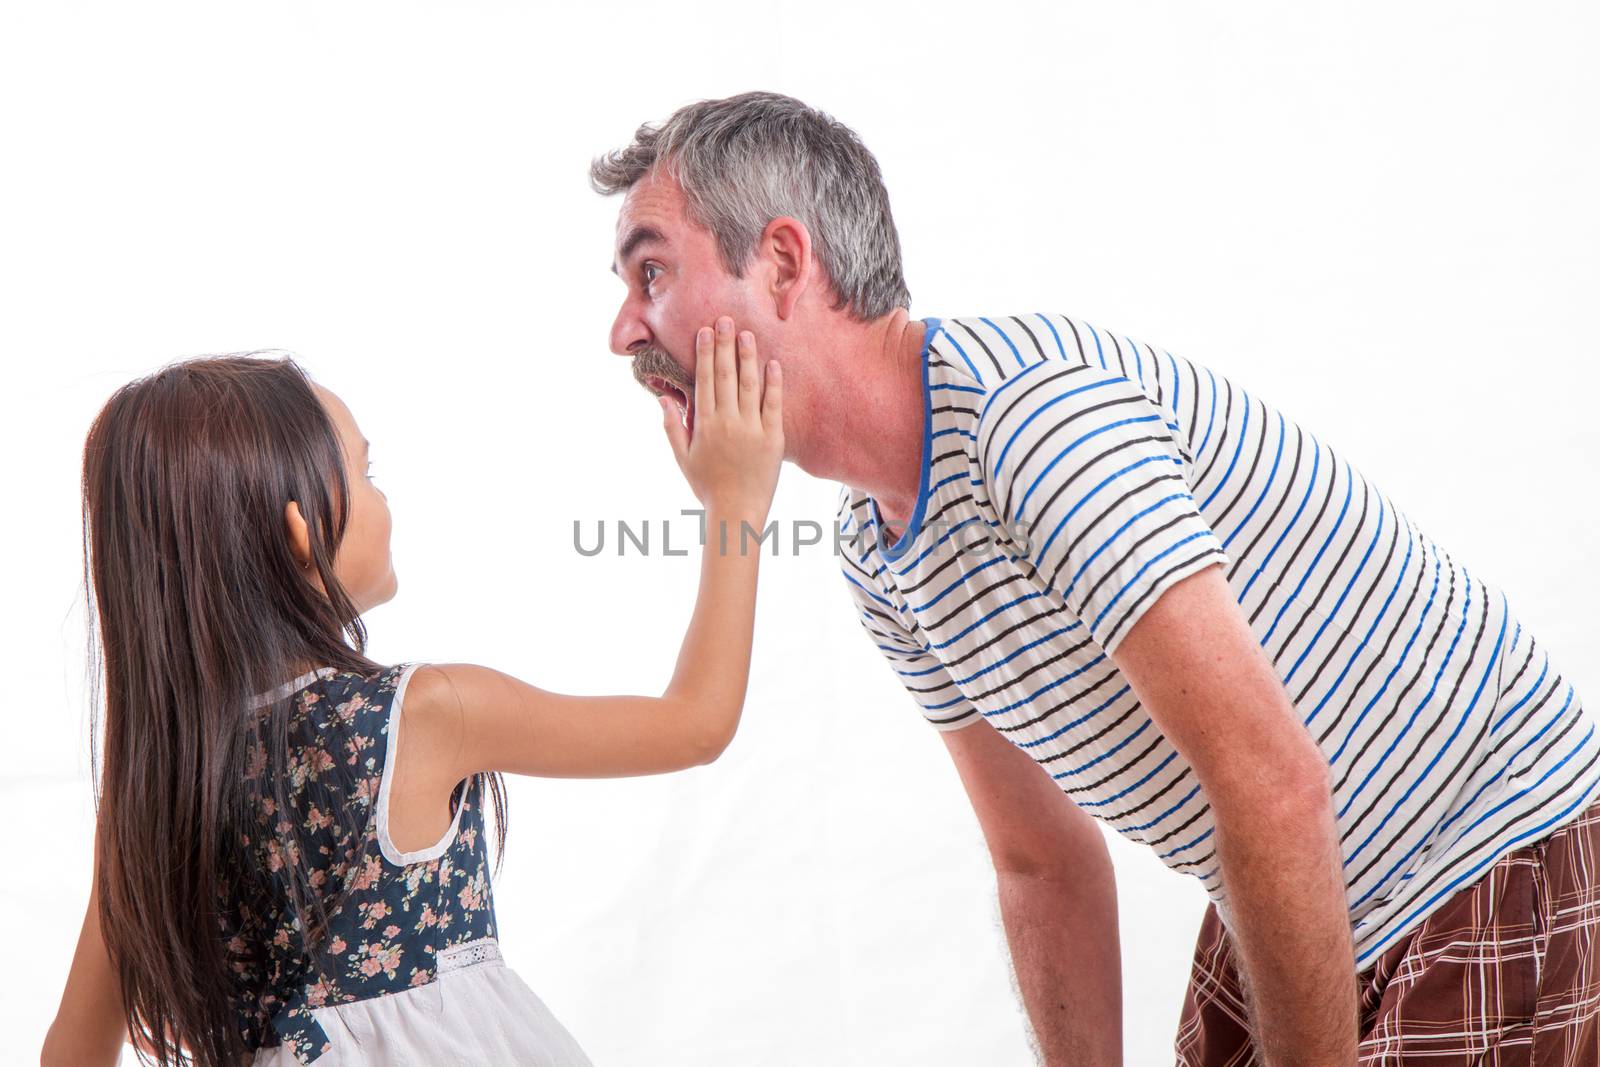 Naughty girl slapping dad by imagesbykenny